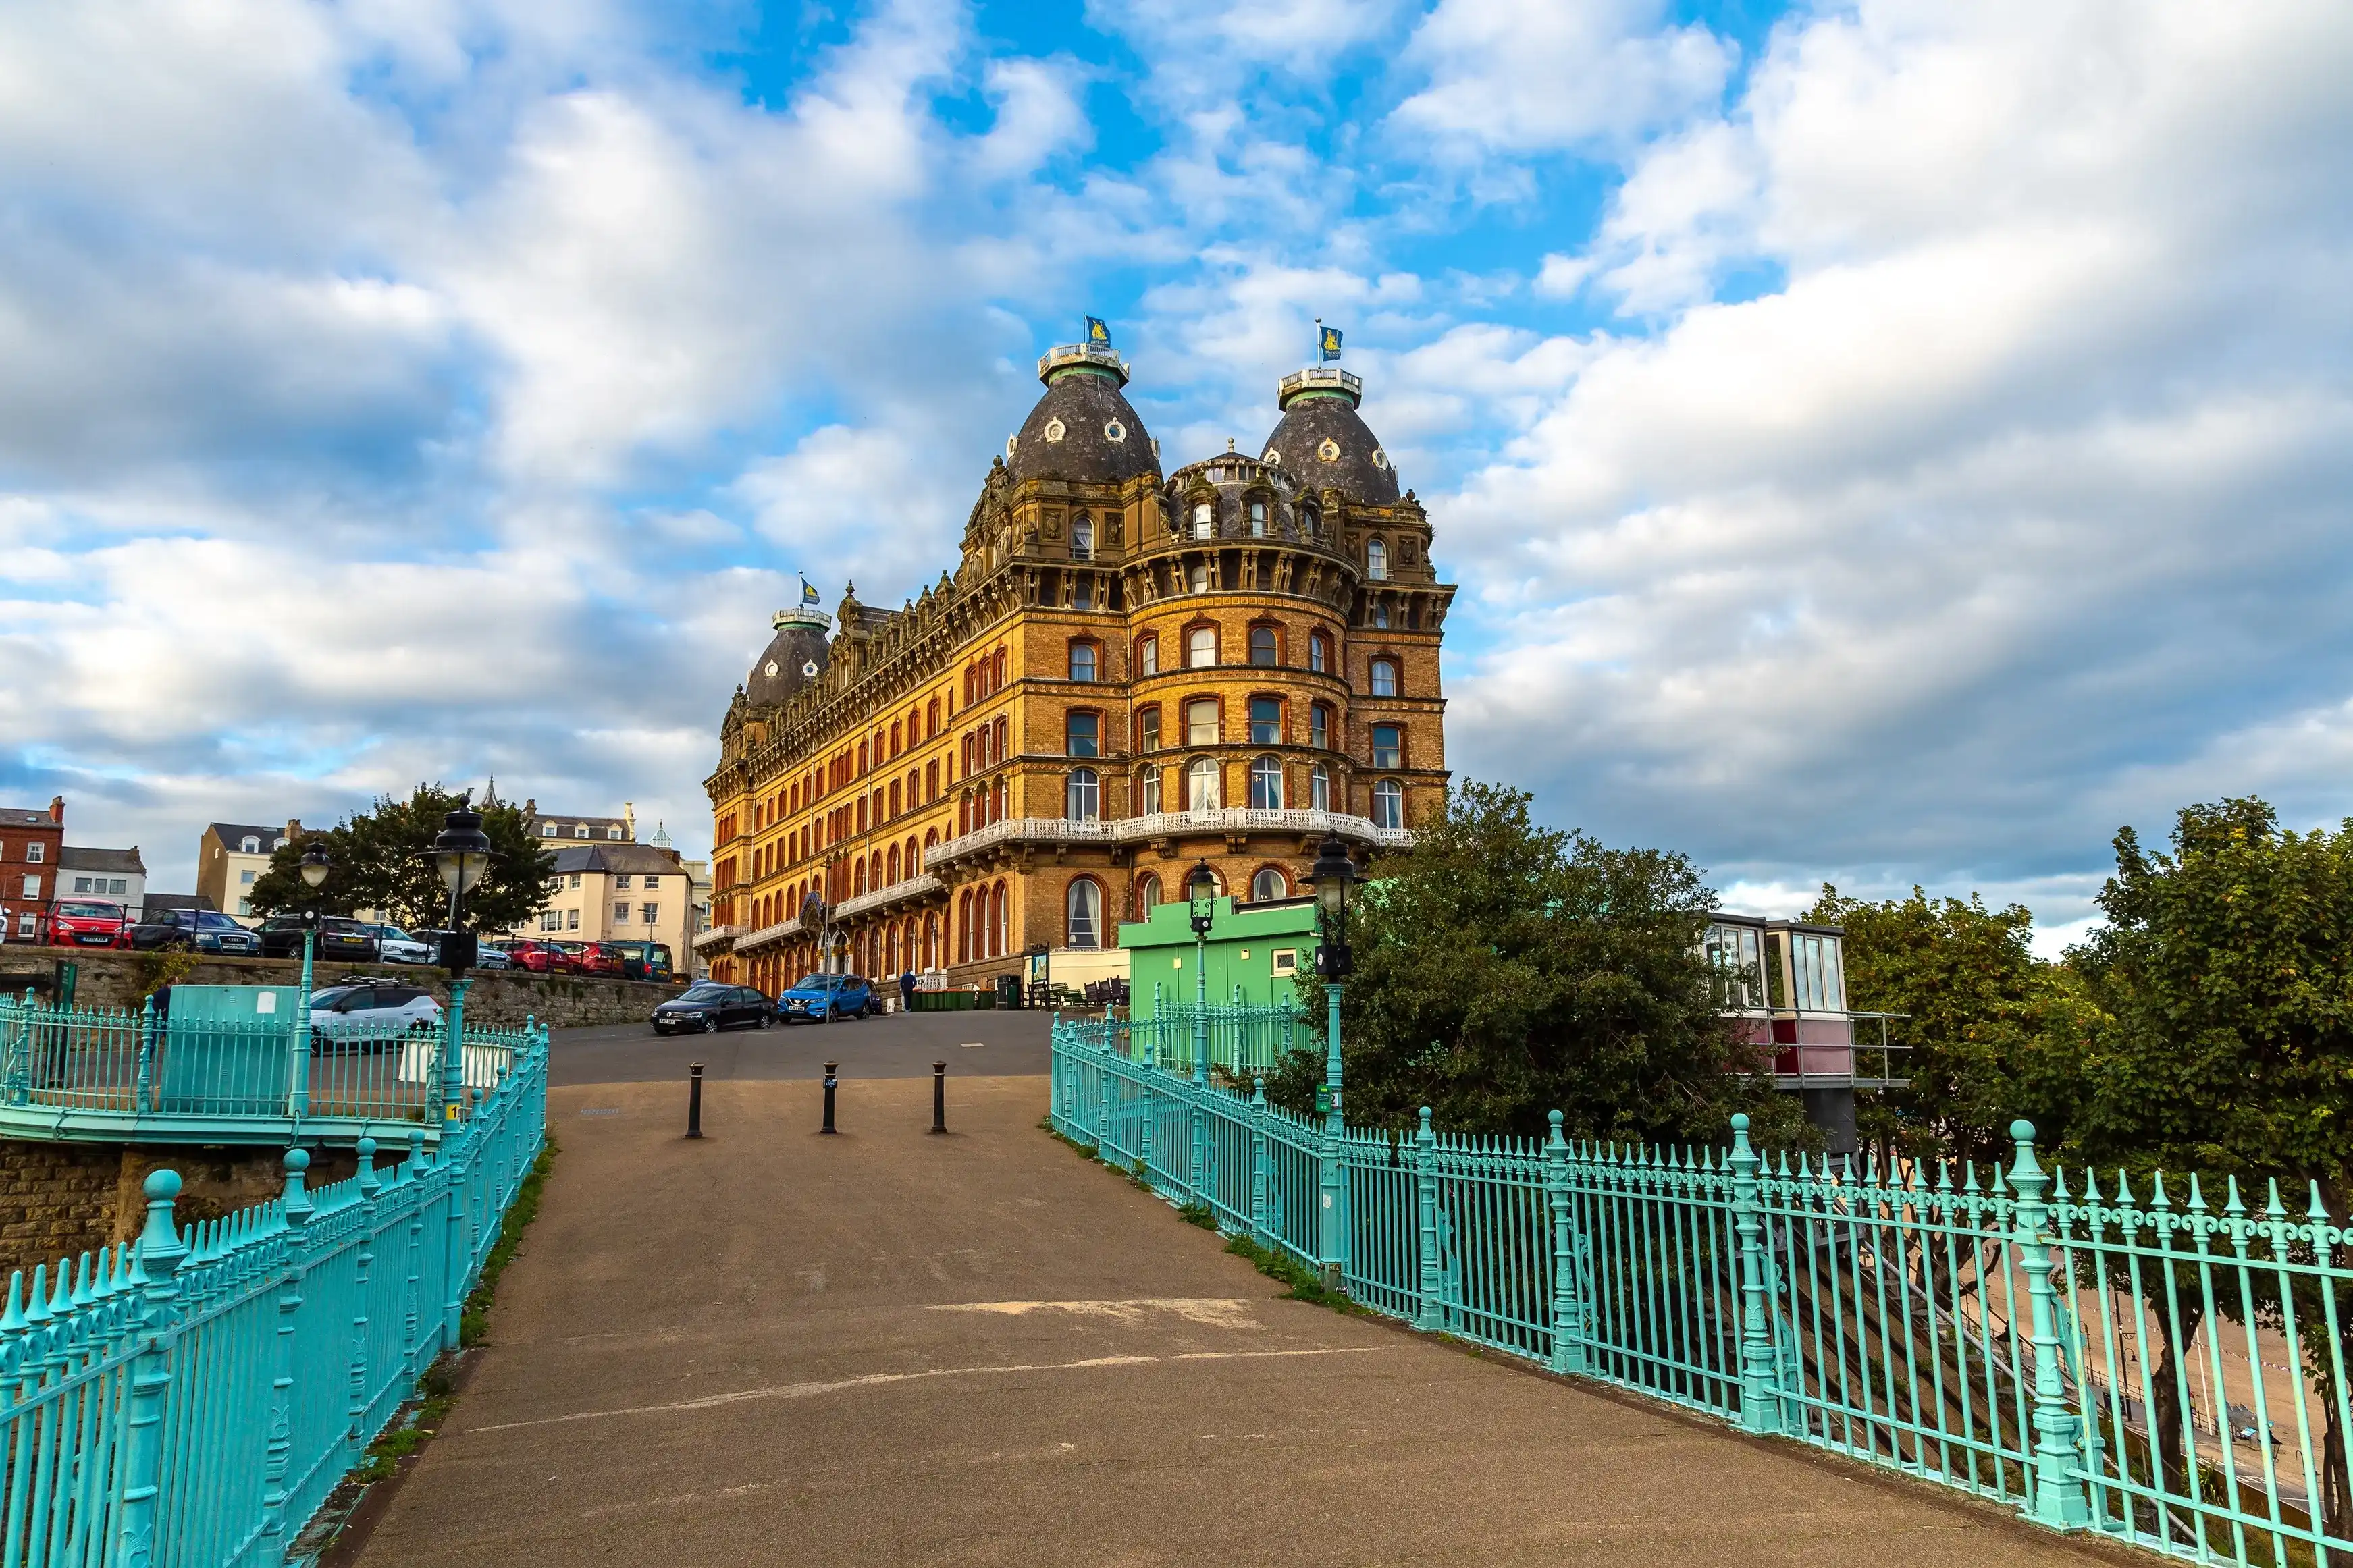 Best Scarborough hotels. Cheap hotels in Scarborough, United Kingdom